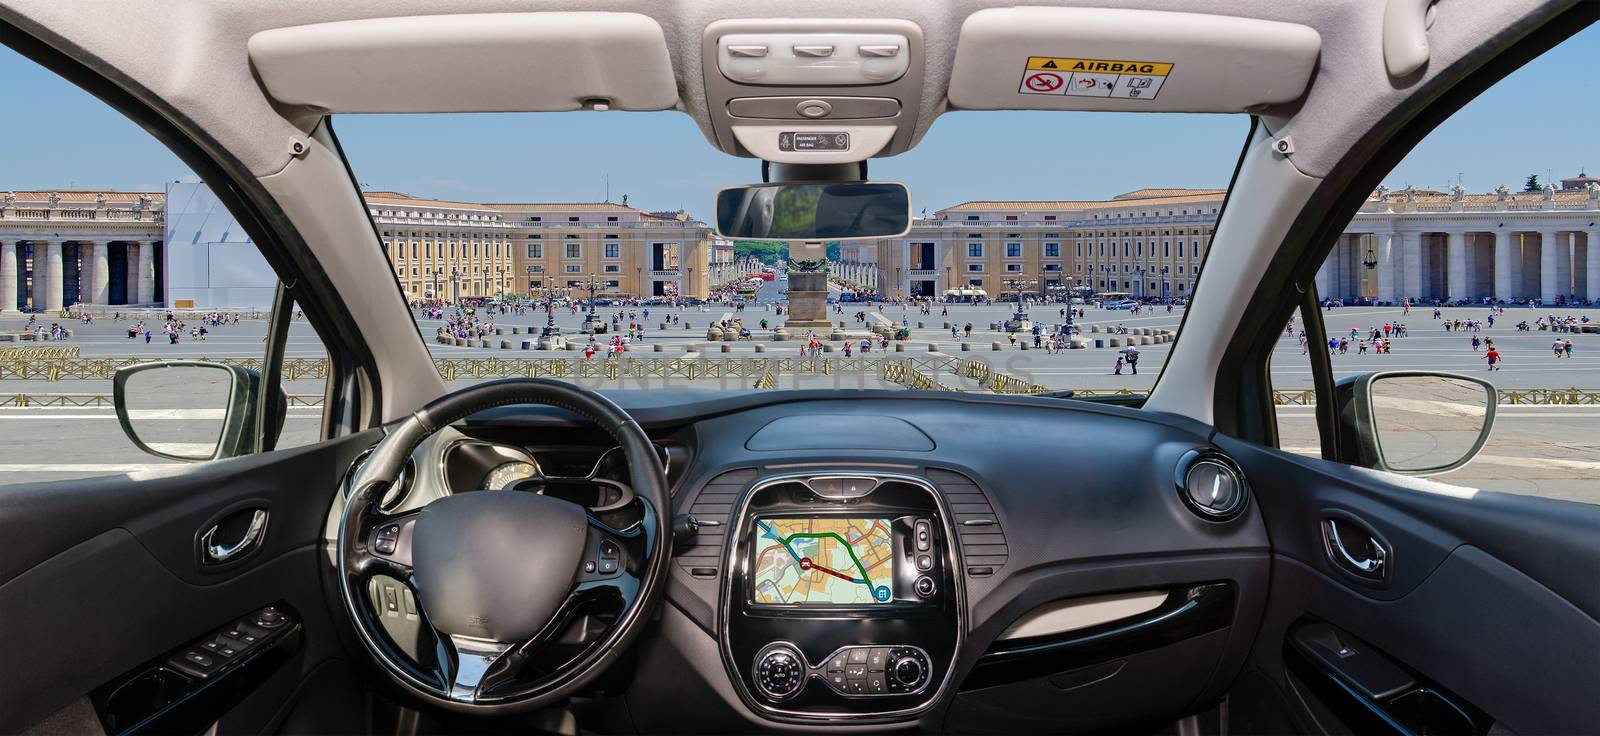 Looking through a car windshield with view over Saint Peter's Square in Vatican City, Rome, Italy